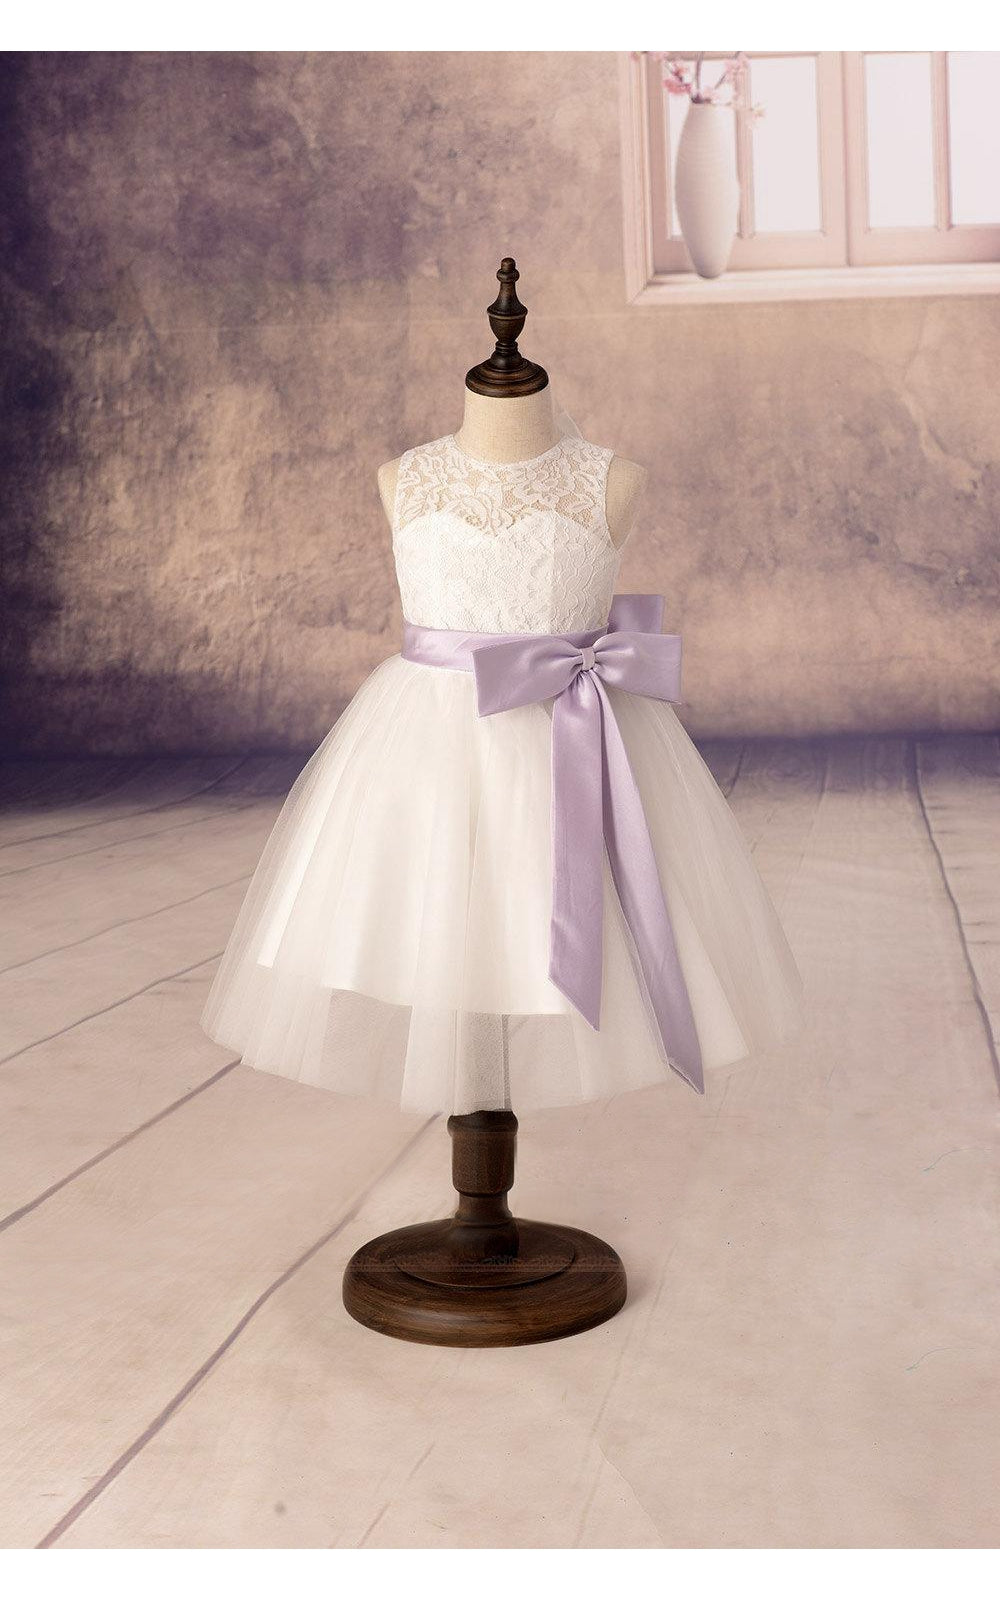 Sleeveless A-line Tulle Flower Girl Dress With Lace Top and Satin Sash-ET_401627